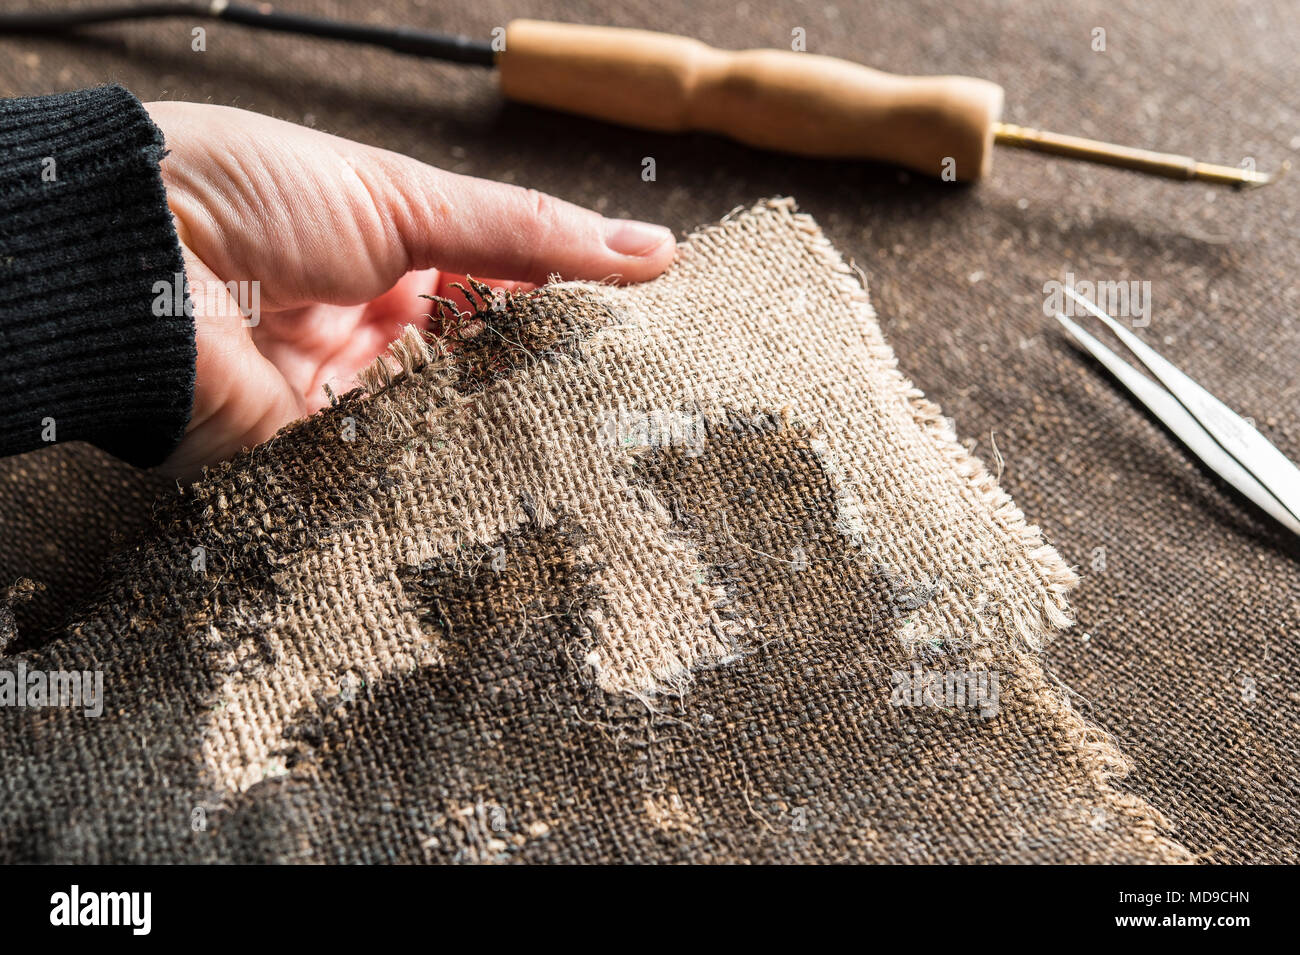 https://c8.alamy.com/comp/MD9CHN/restoration-studio-restorer-hand-holds-the-finished-processed-and-woven-linen-piece-behind-heating-spatula-and-tweezers-MD9CHN.jpg